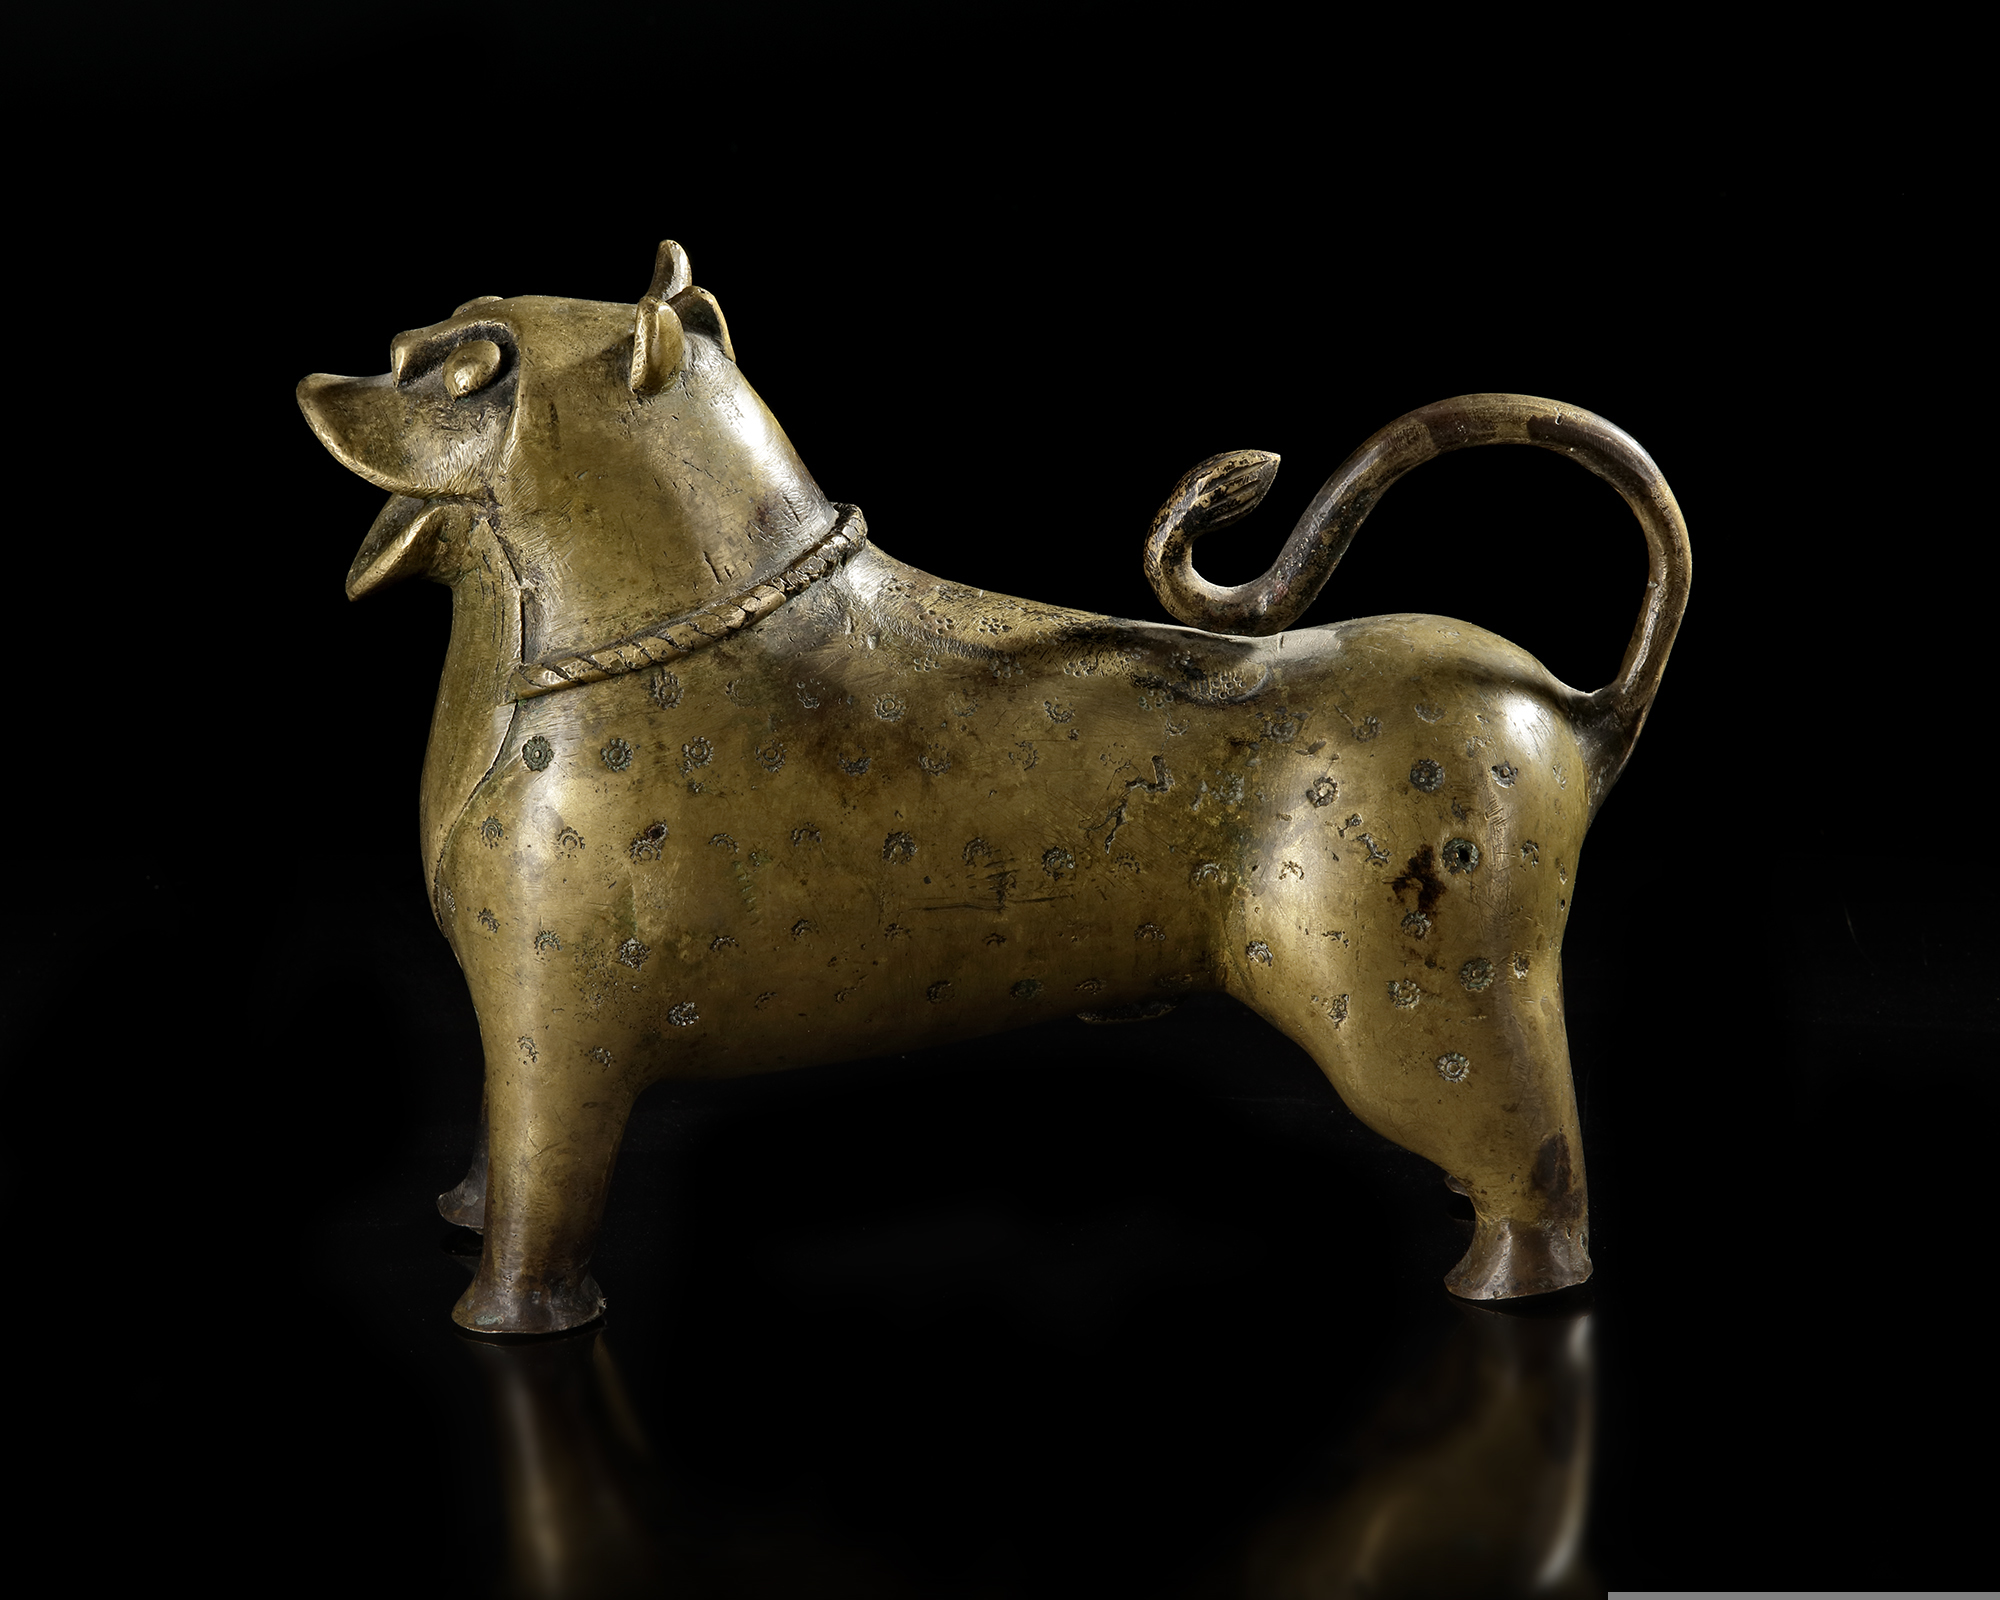 A MUGHAL BRASS INCENSE BURNER IN THE FORM OF A LION, INDIA, 17TH CENTURY - Image 4 of 4